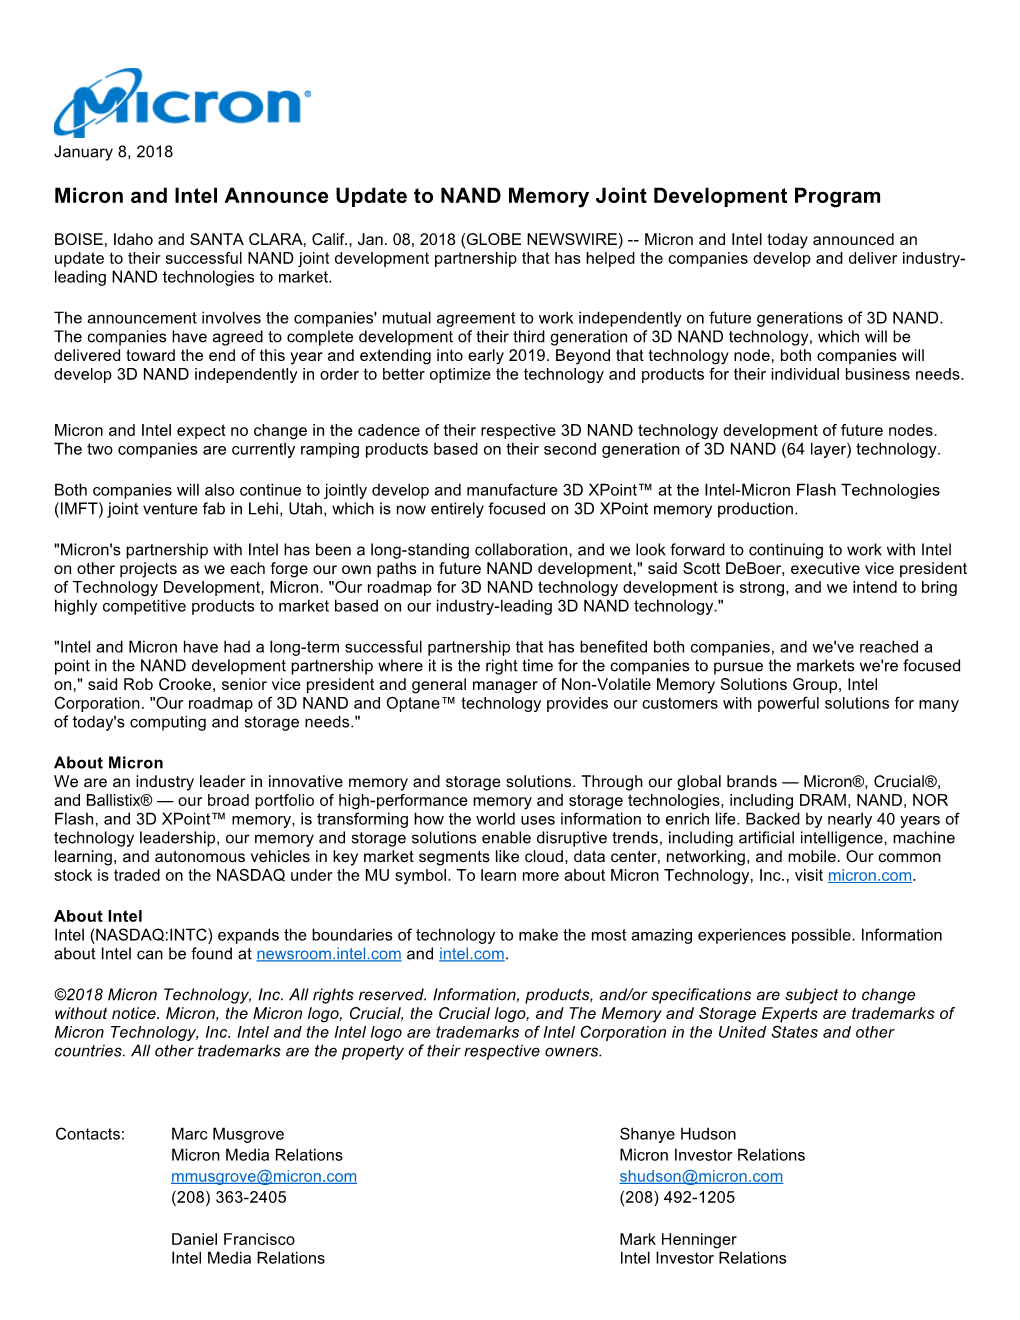 Micron and Intel Announce Update to NAND Memory Joint Development Program